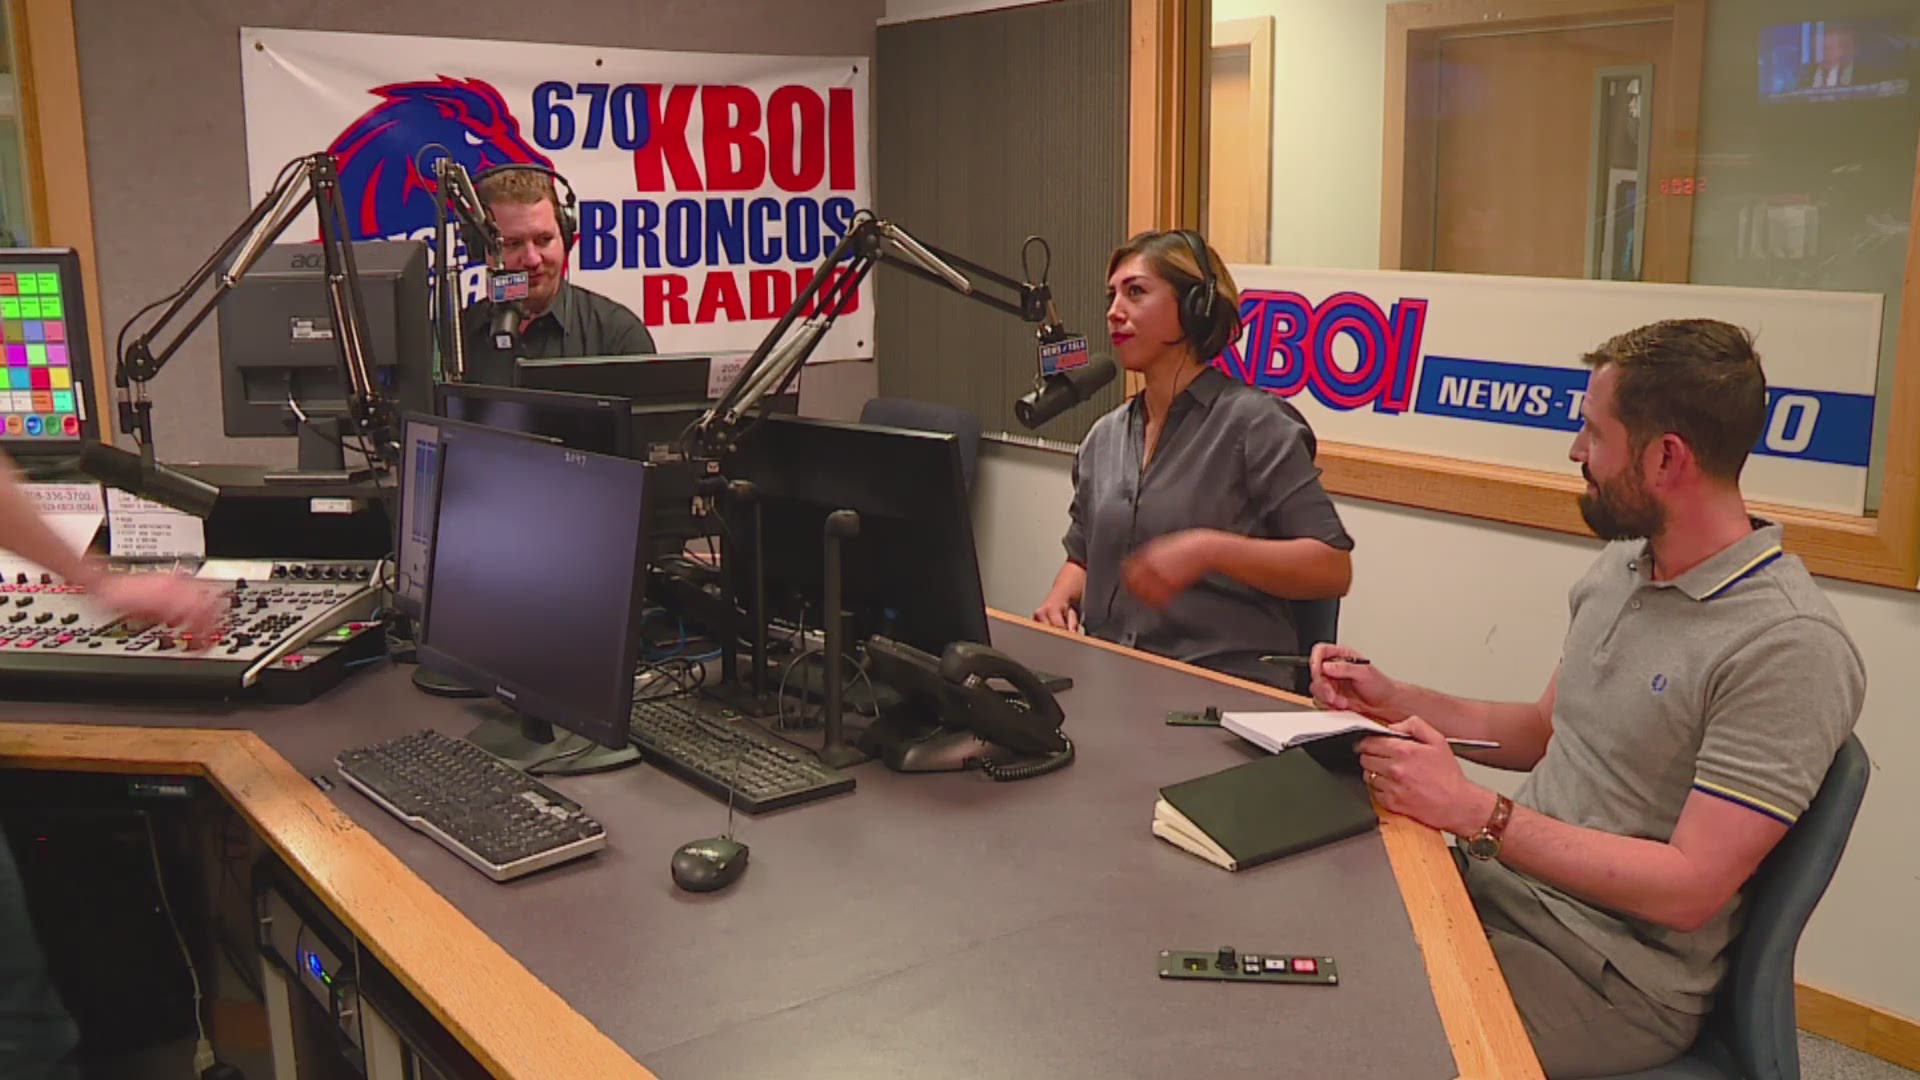 Idaho Democratic gubernatorial candidate Paulette Jordan answered questions on The Nate Shelman Show on 670 KBOI talk radio about the latest headlines and her platform on September 21, 2018.